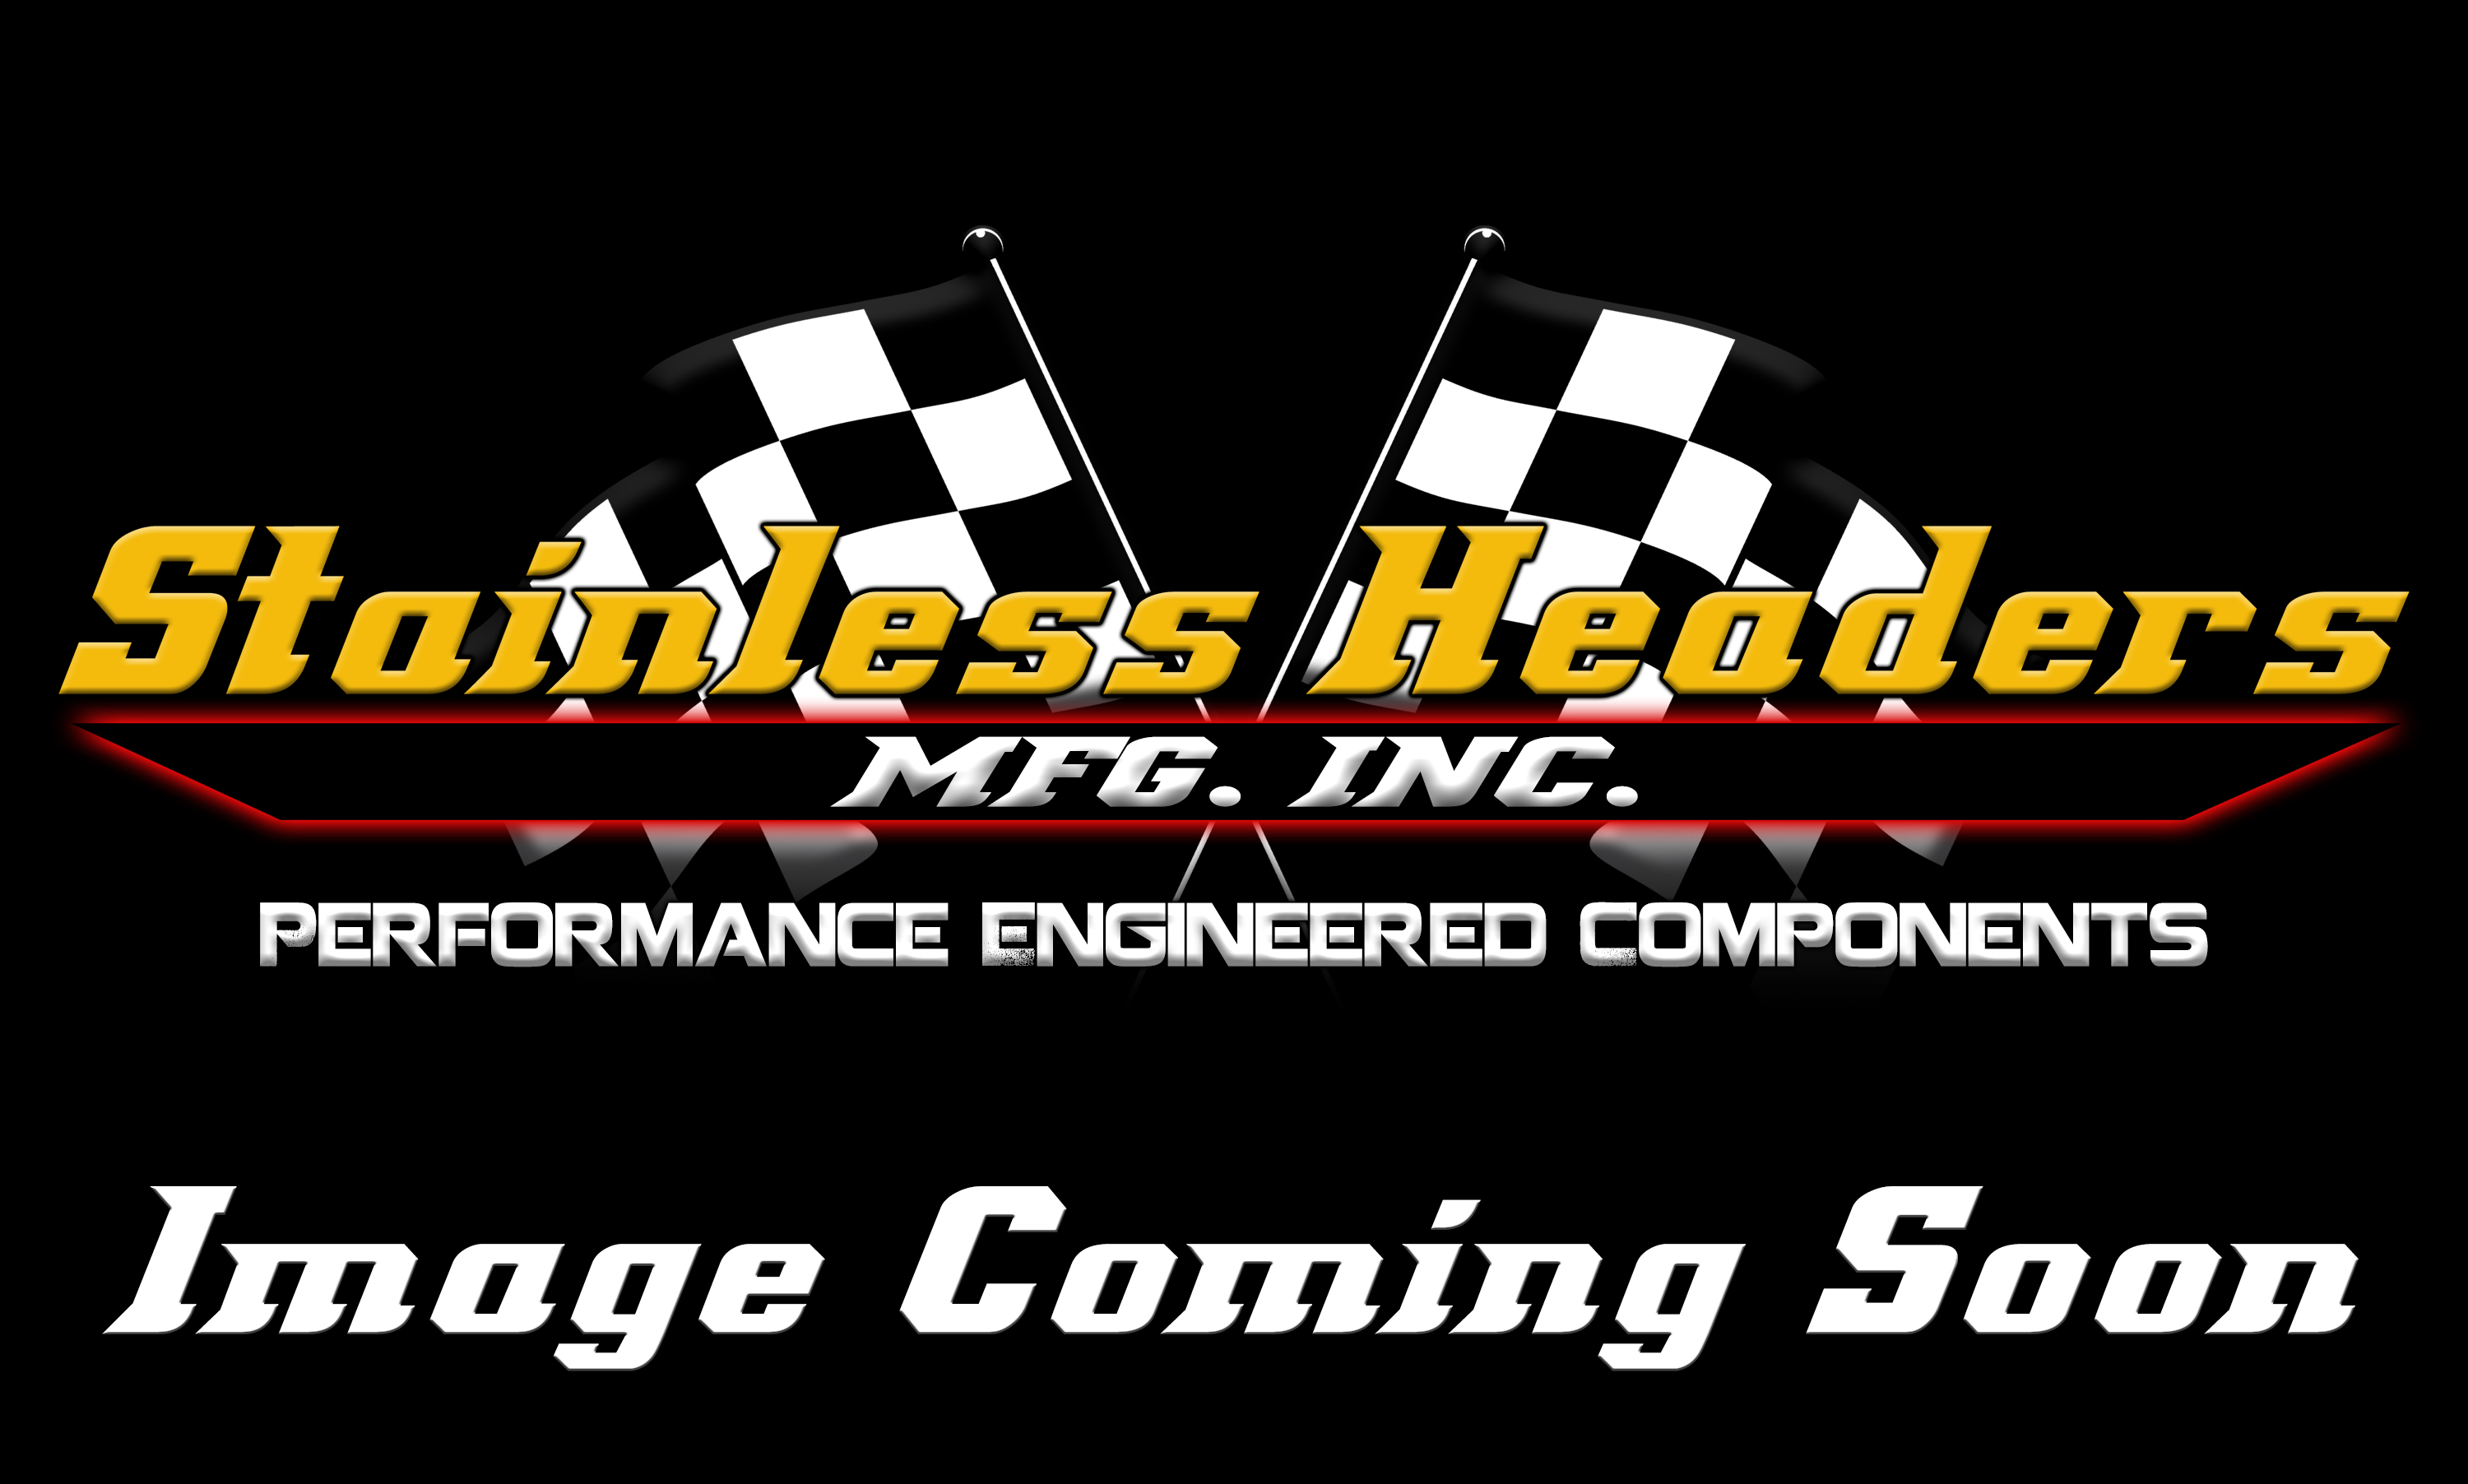 Custom Header Components - Merge Collectors - Stainless Headers - 1 3/4" Primary 2 into 1 Performance Merge Collector-16ga Mild Steel